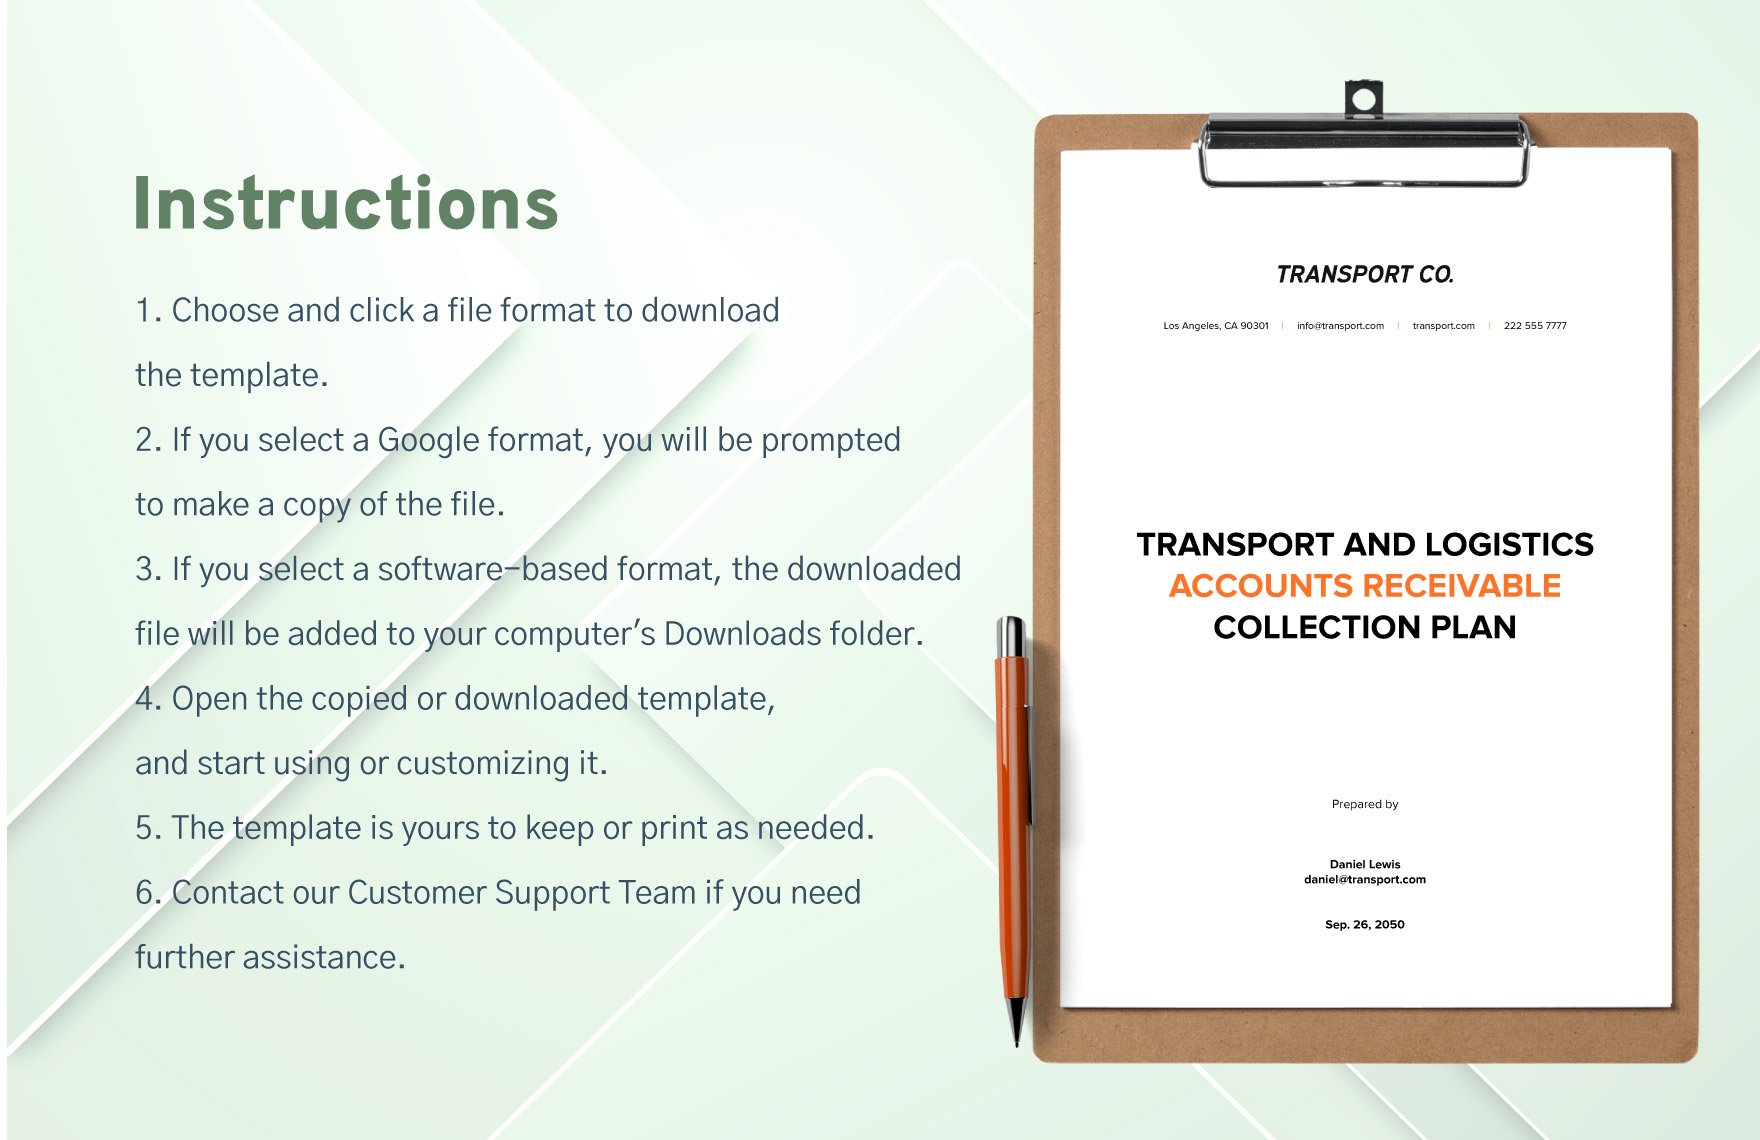 Transport and Logistics Accounts Receivable Collection Plan Template